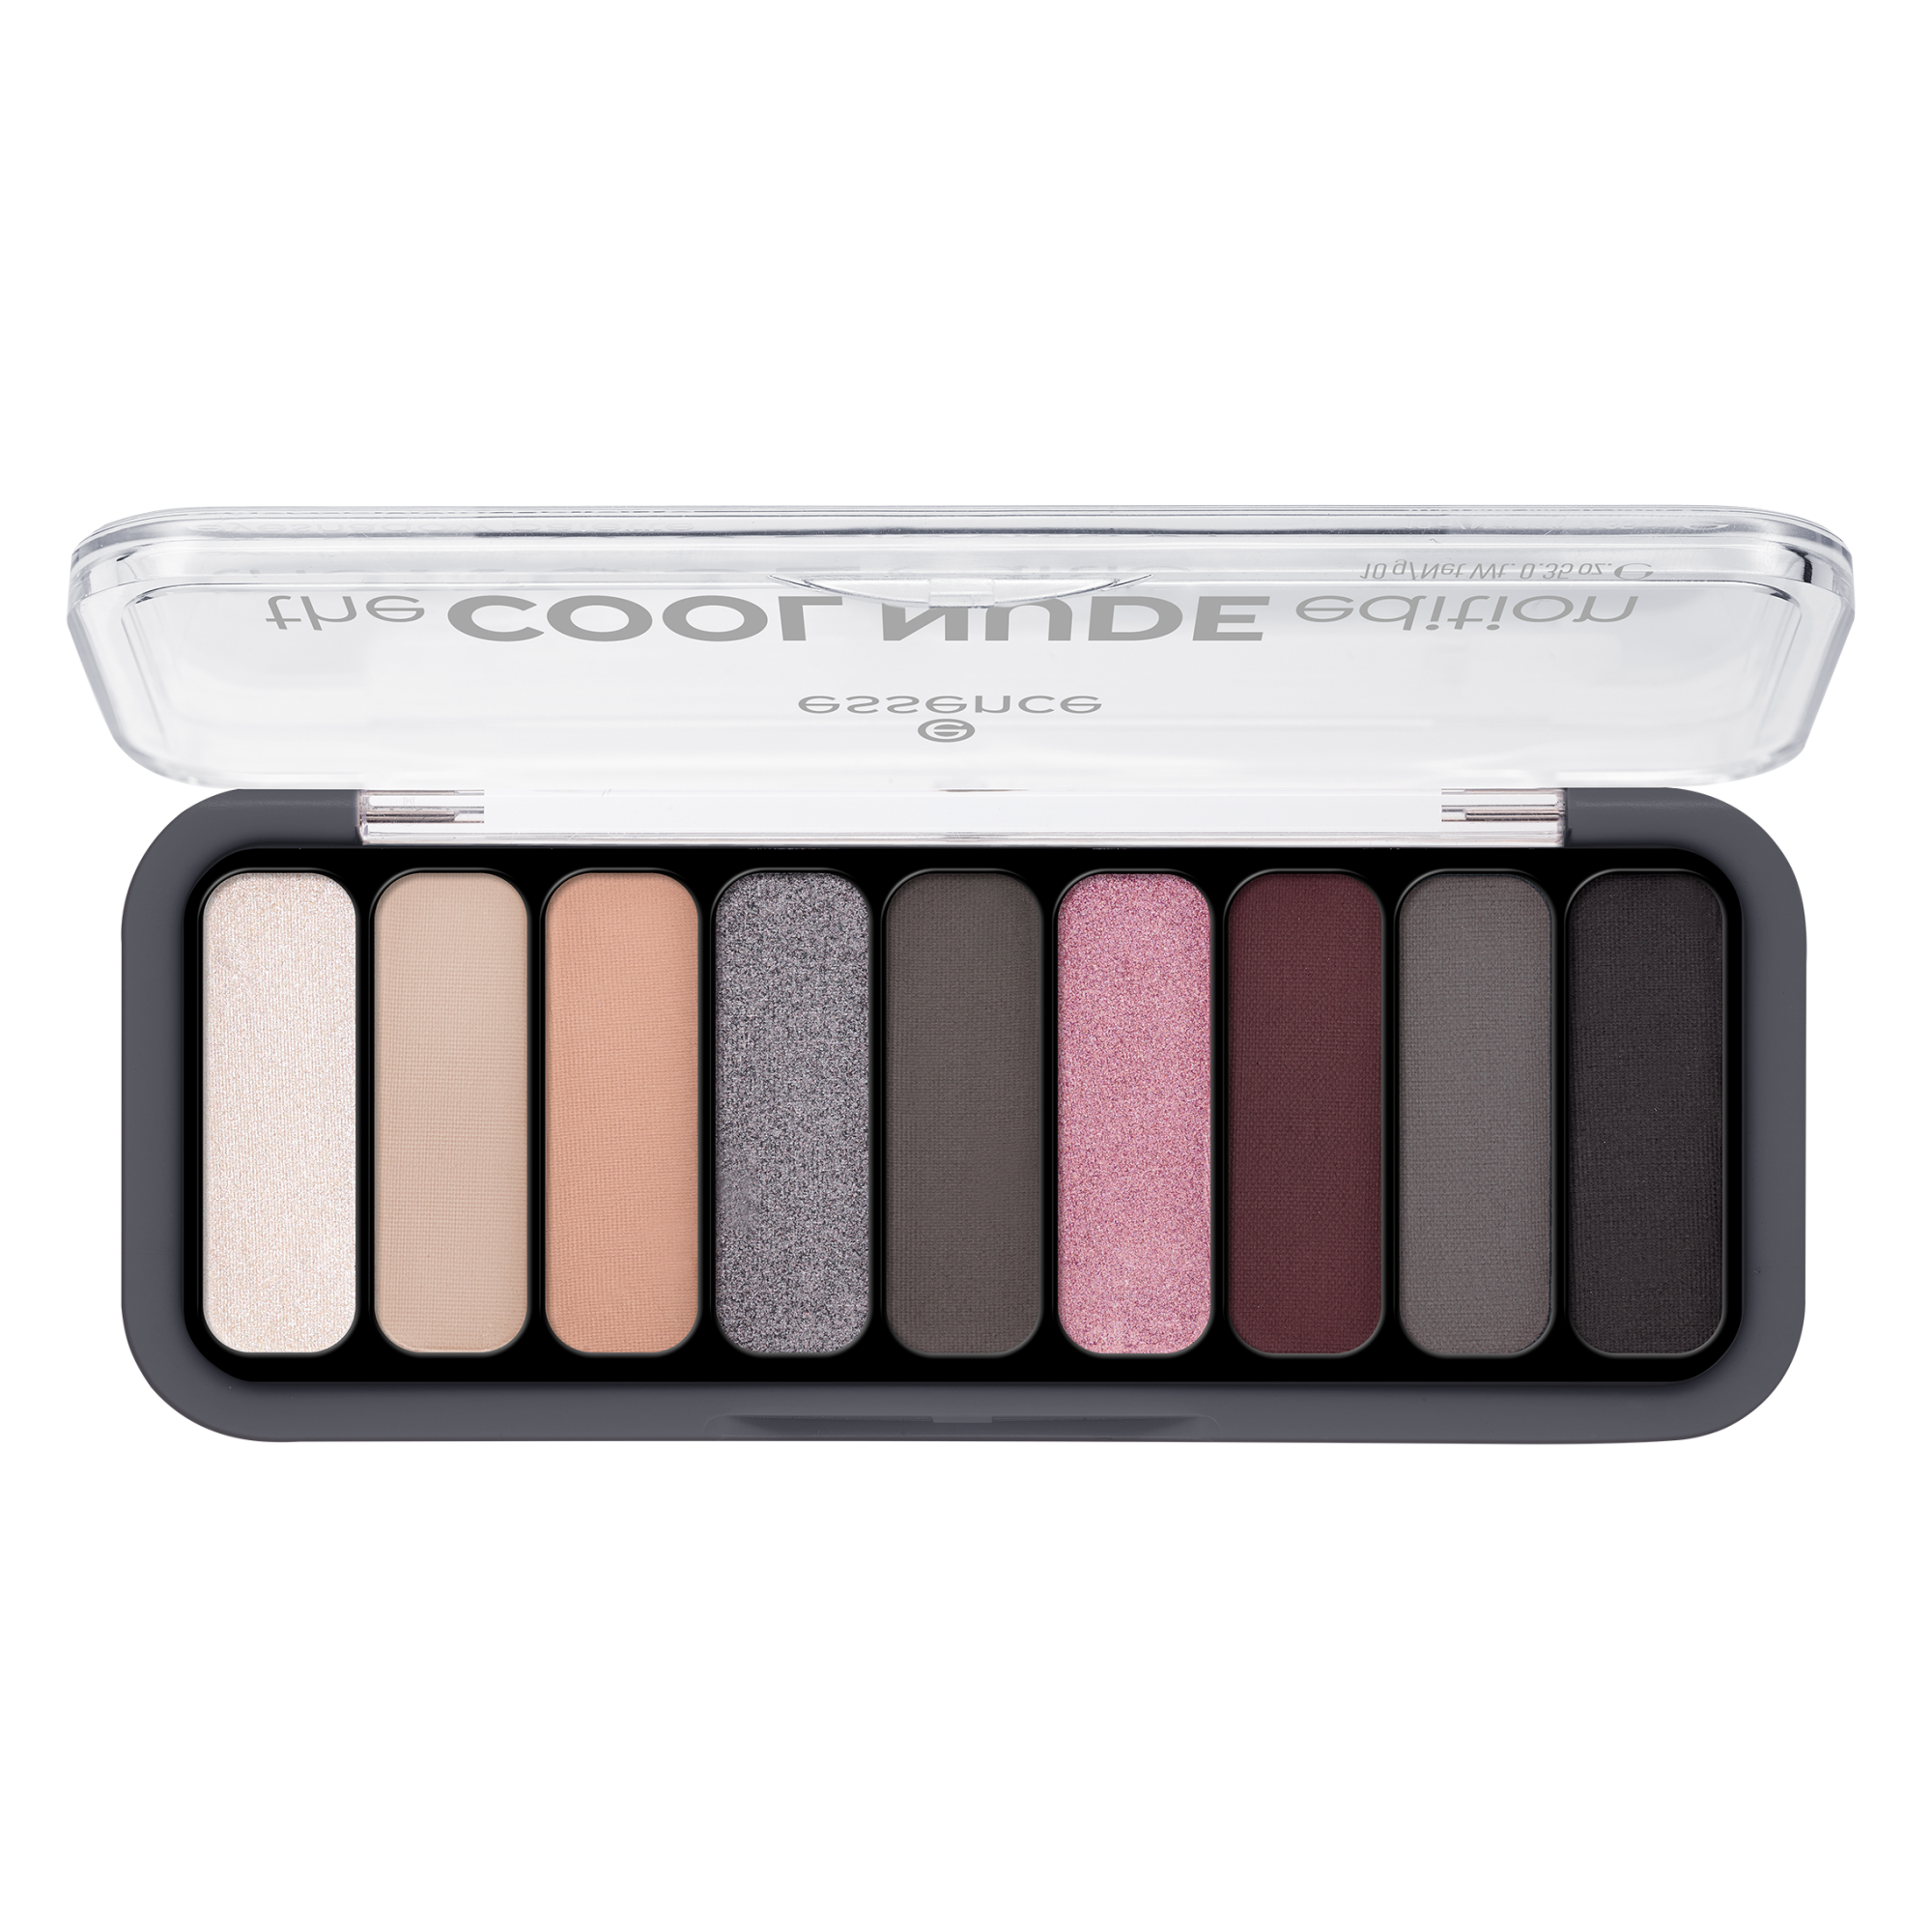 COOL NUDE edition eyeshadow palet